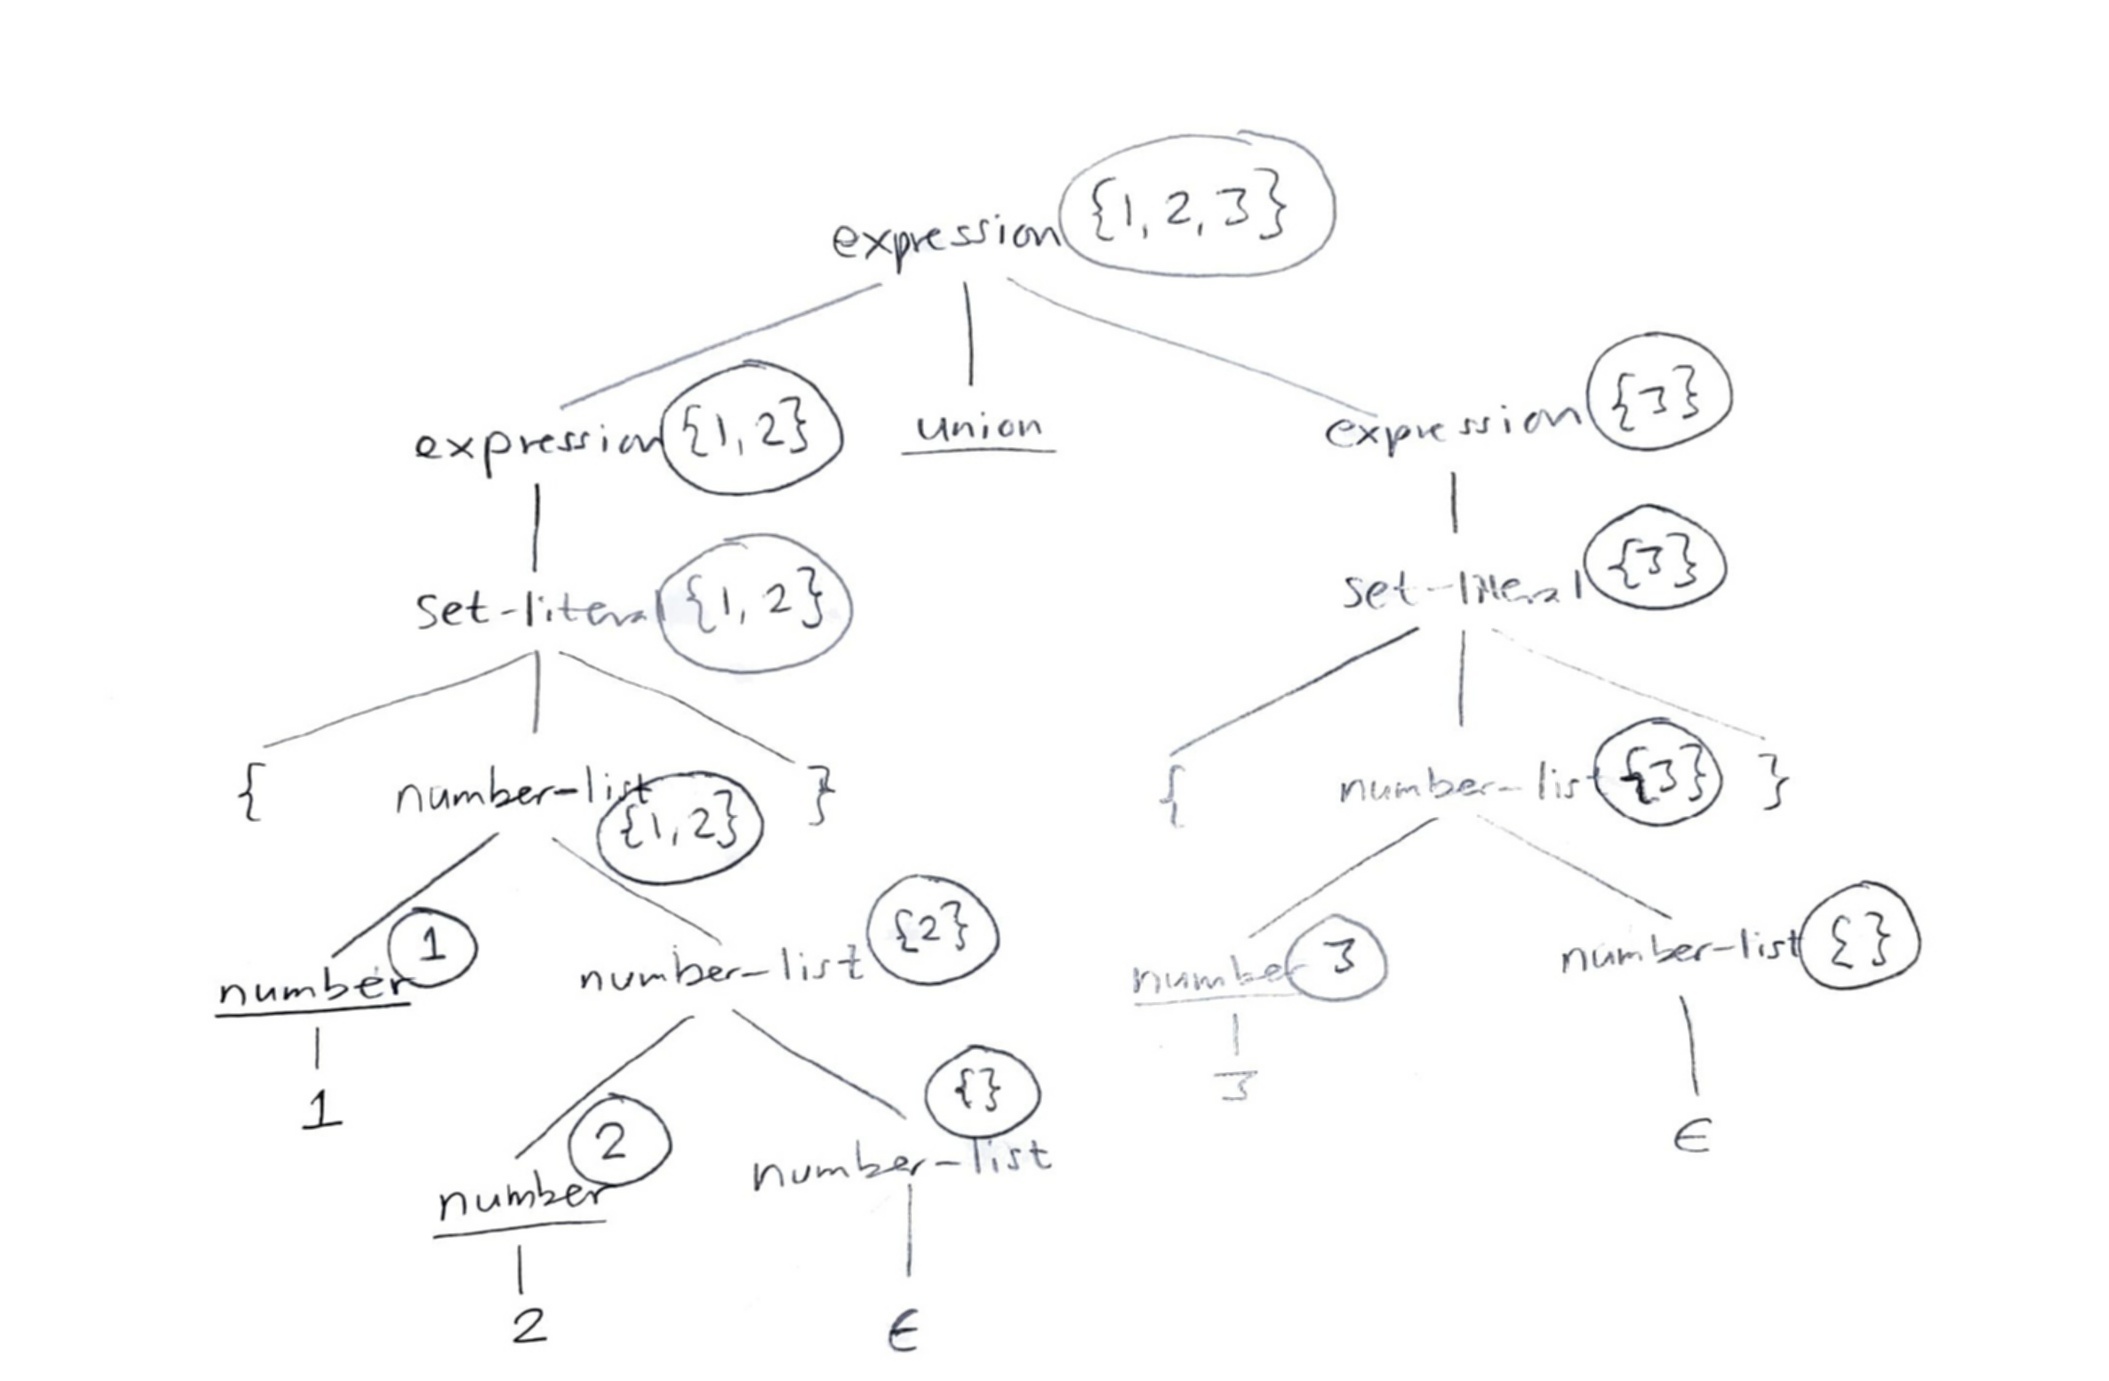 A decorated parse tree